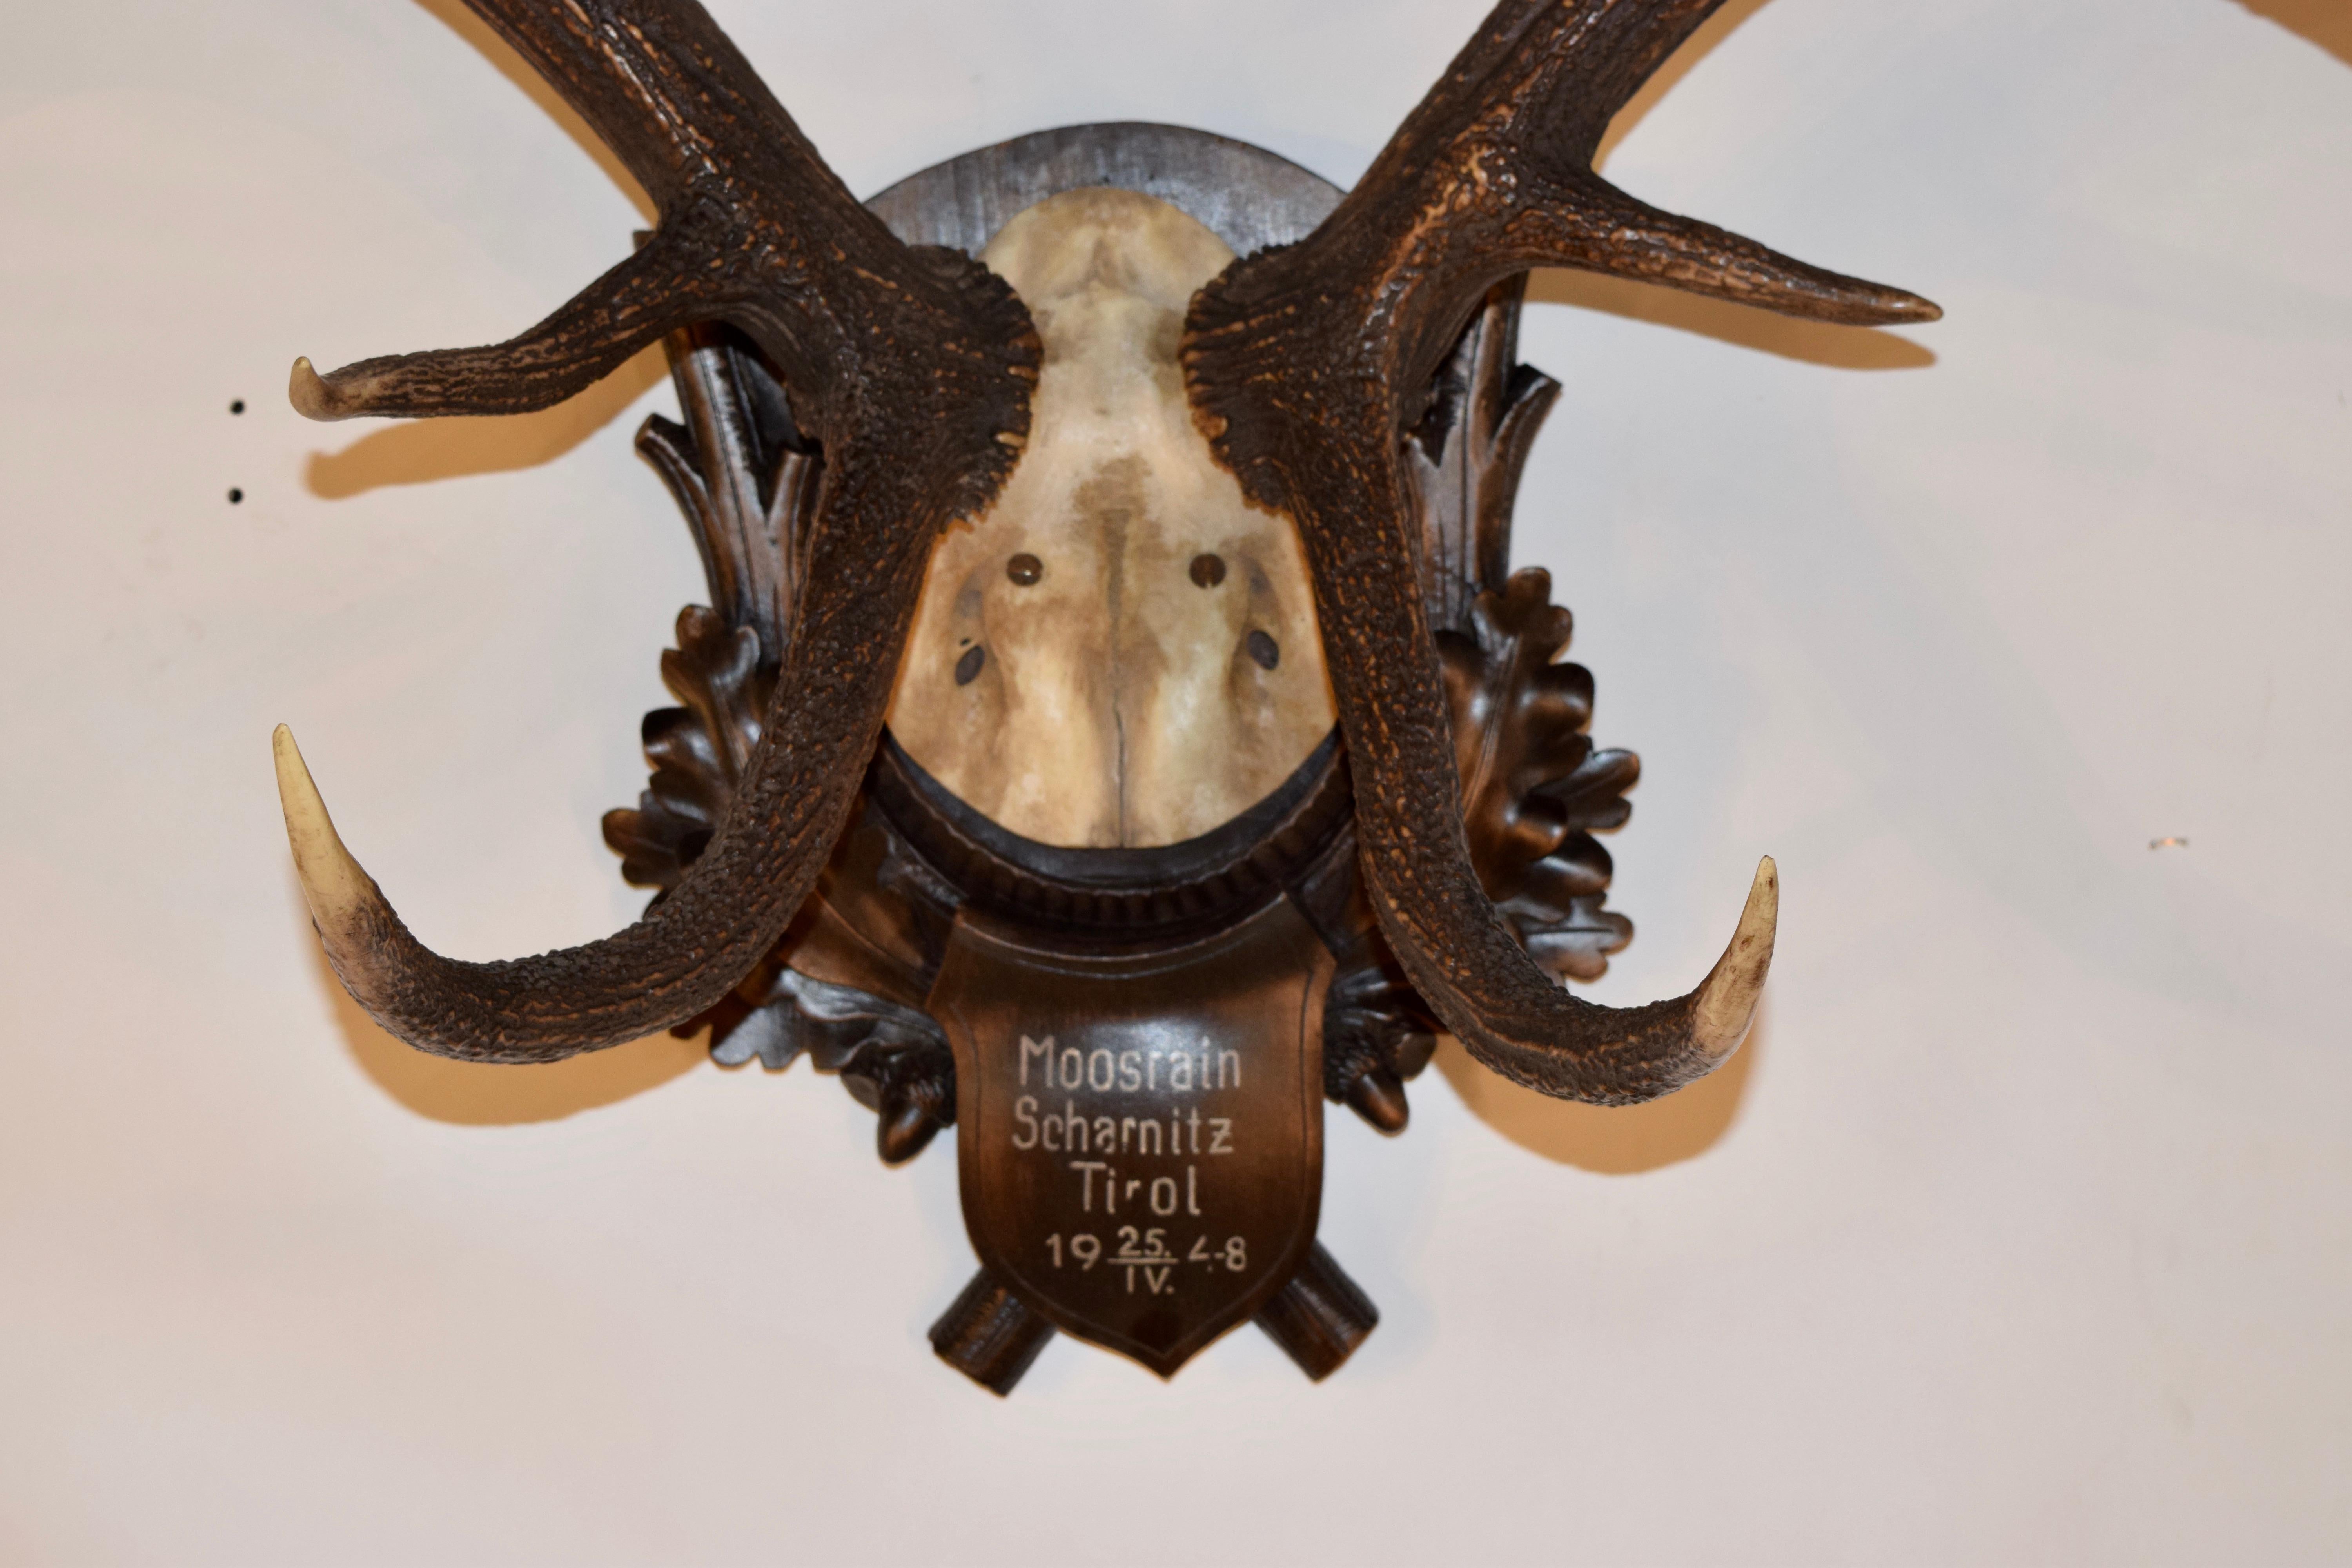 Mounted 11 point red stag trophy with hand carved Black Forest plaque. The plaque is signed Moosrain Scharnitz Tirol, which is in between German and Austrian border. It is a pass well known for outdoor sports. This trophy dates from 1948.